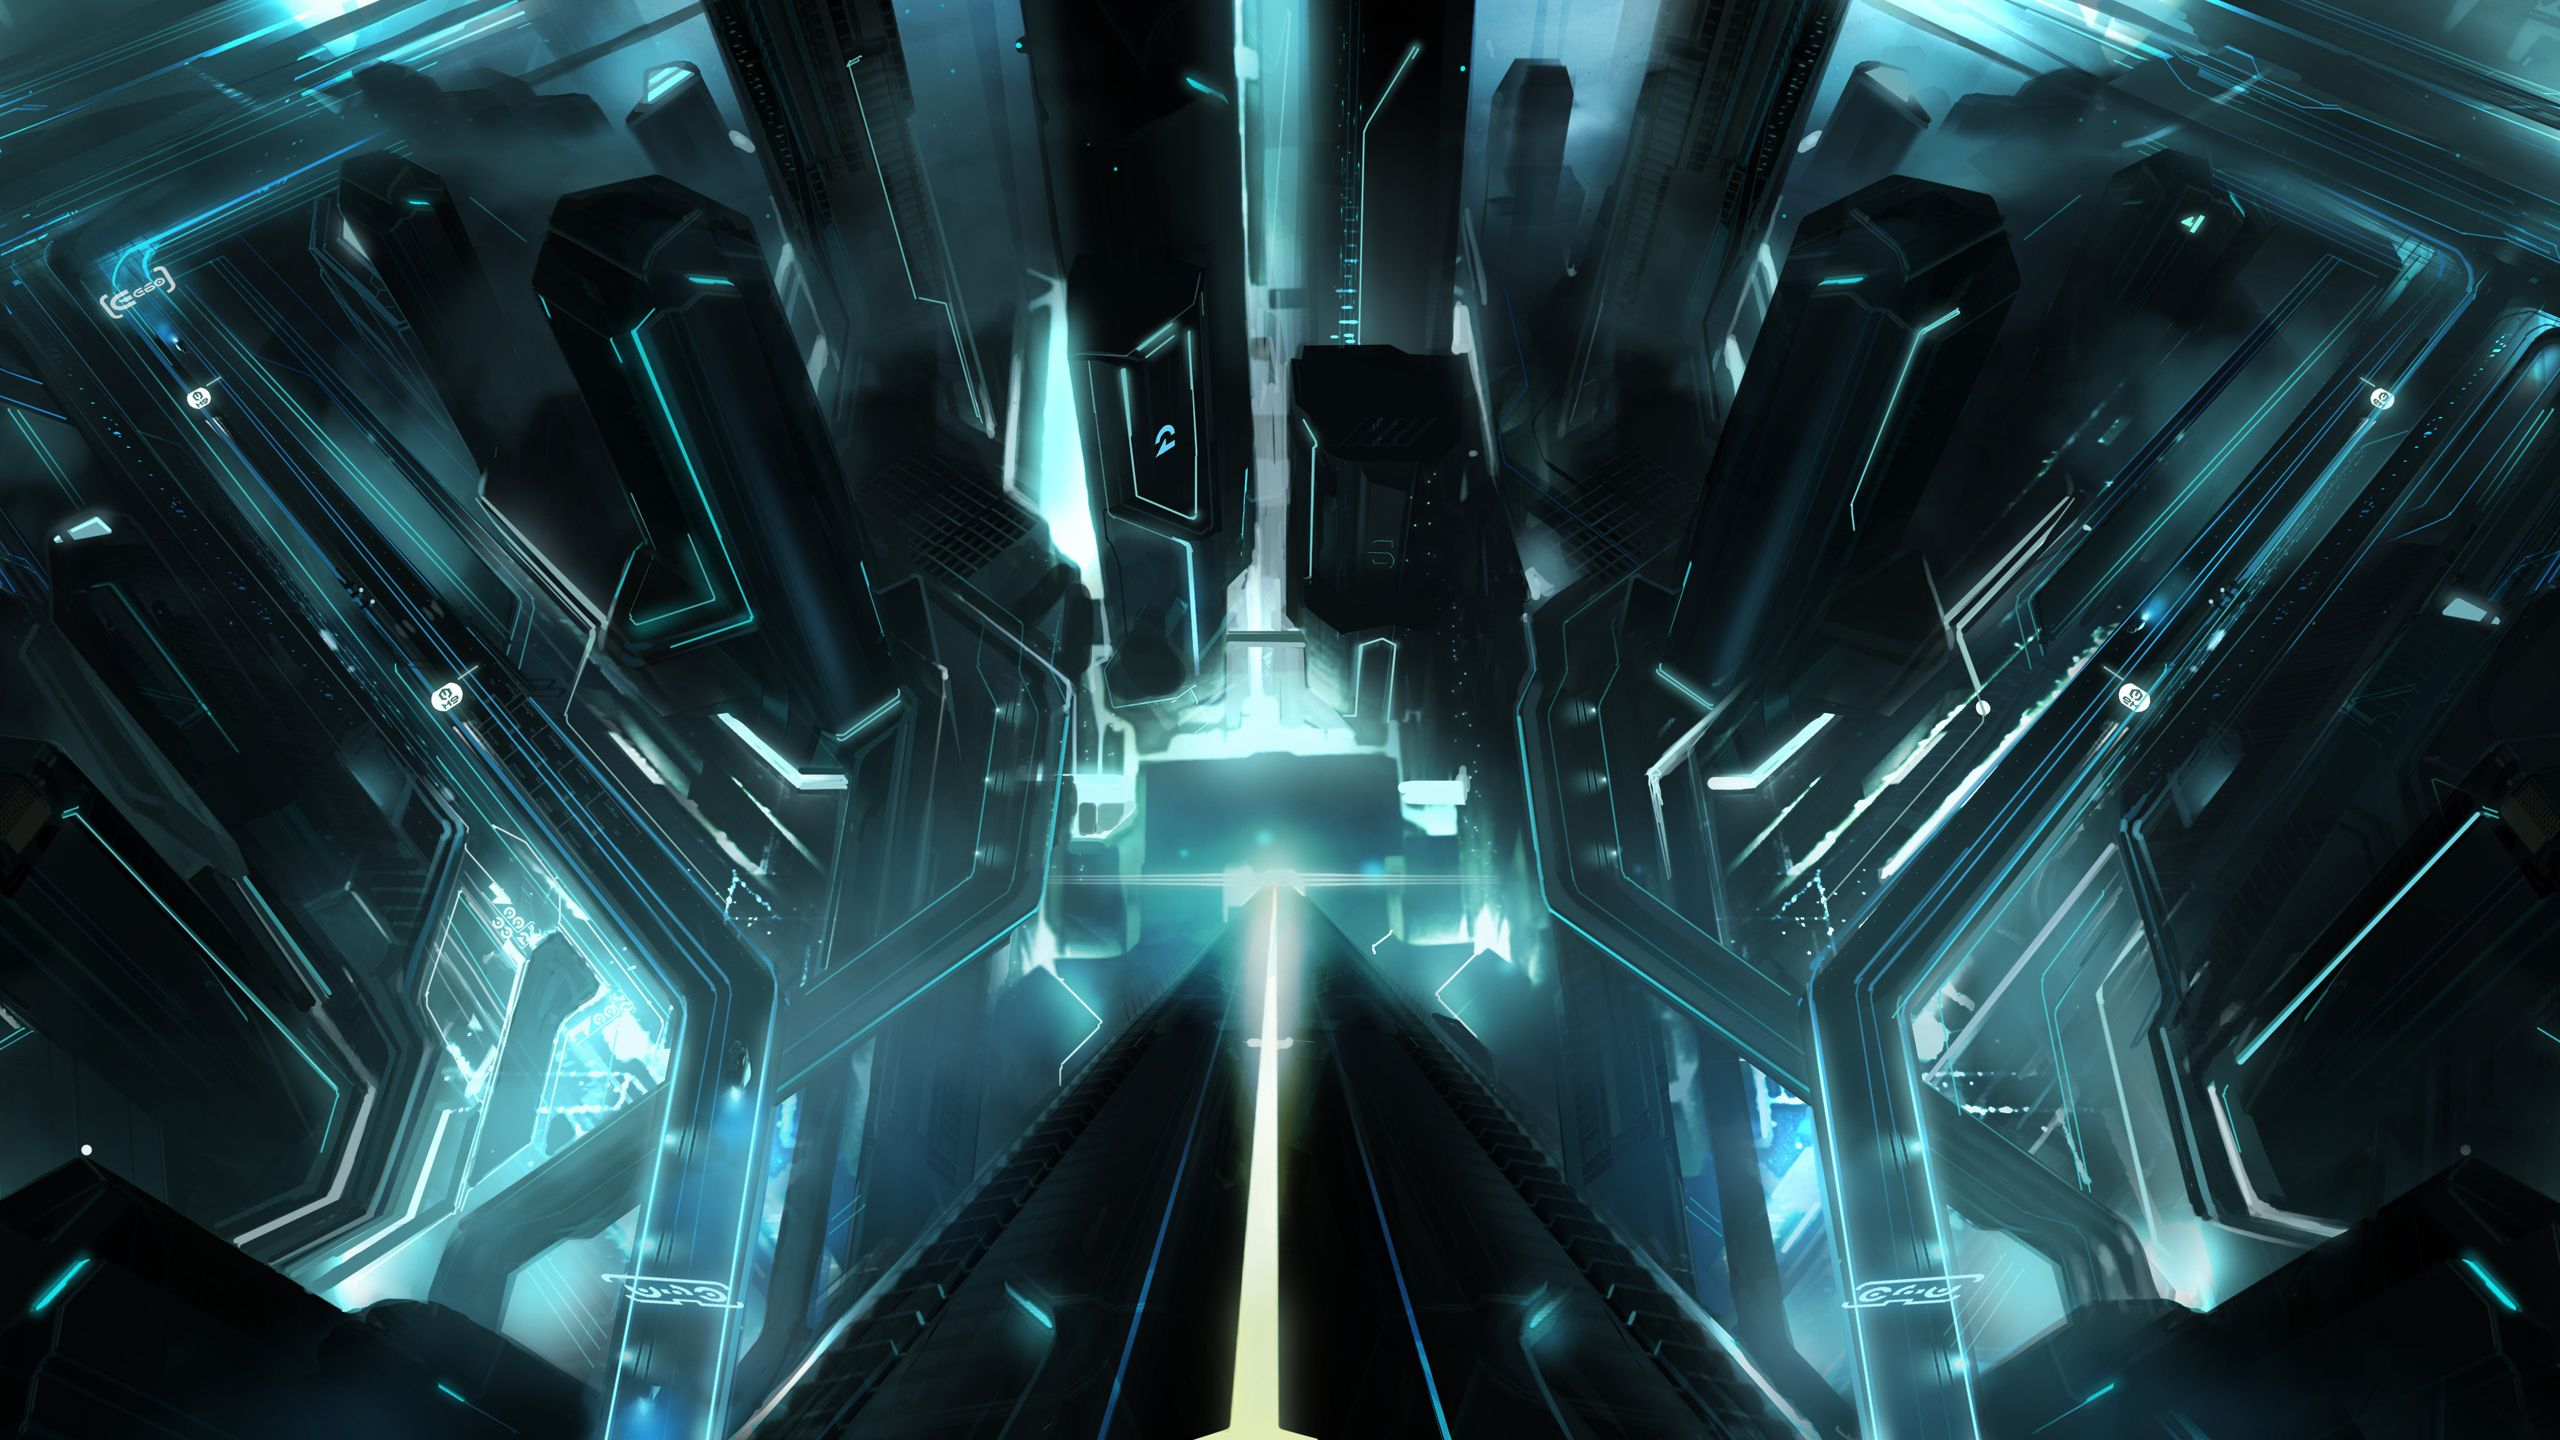 2560x1440 Amazing HD Wallpapers for your Desktop | Tron legacy, Concept art, Tr